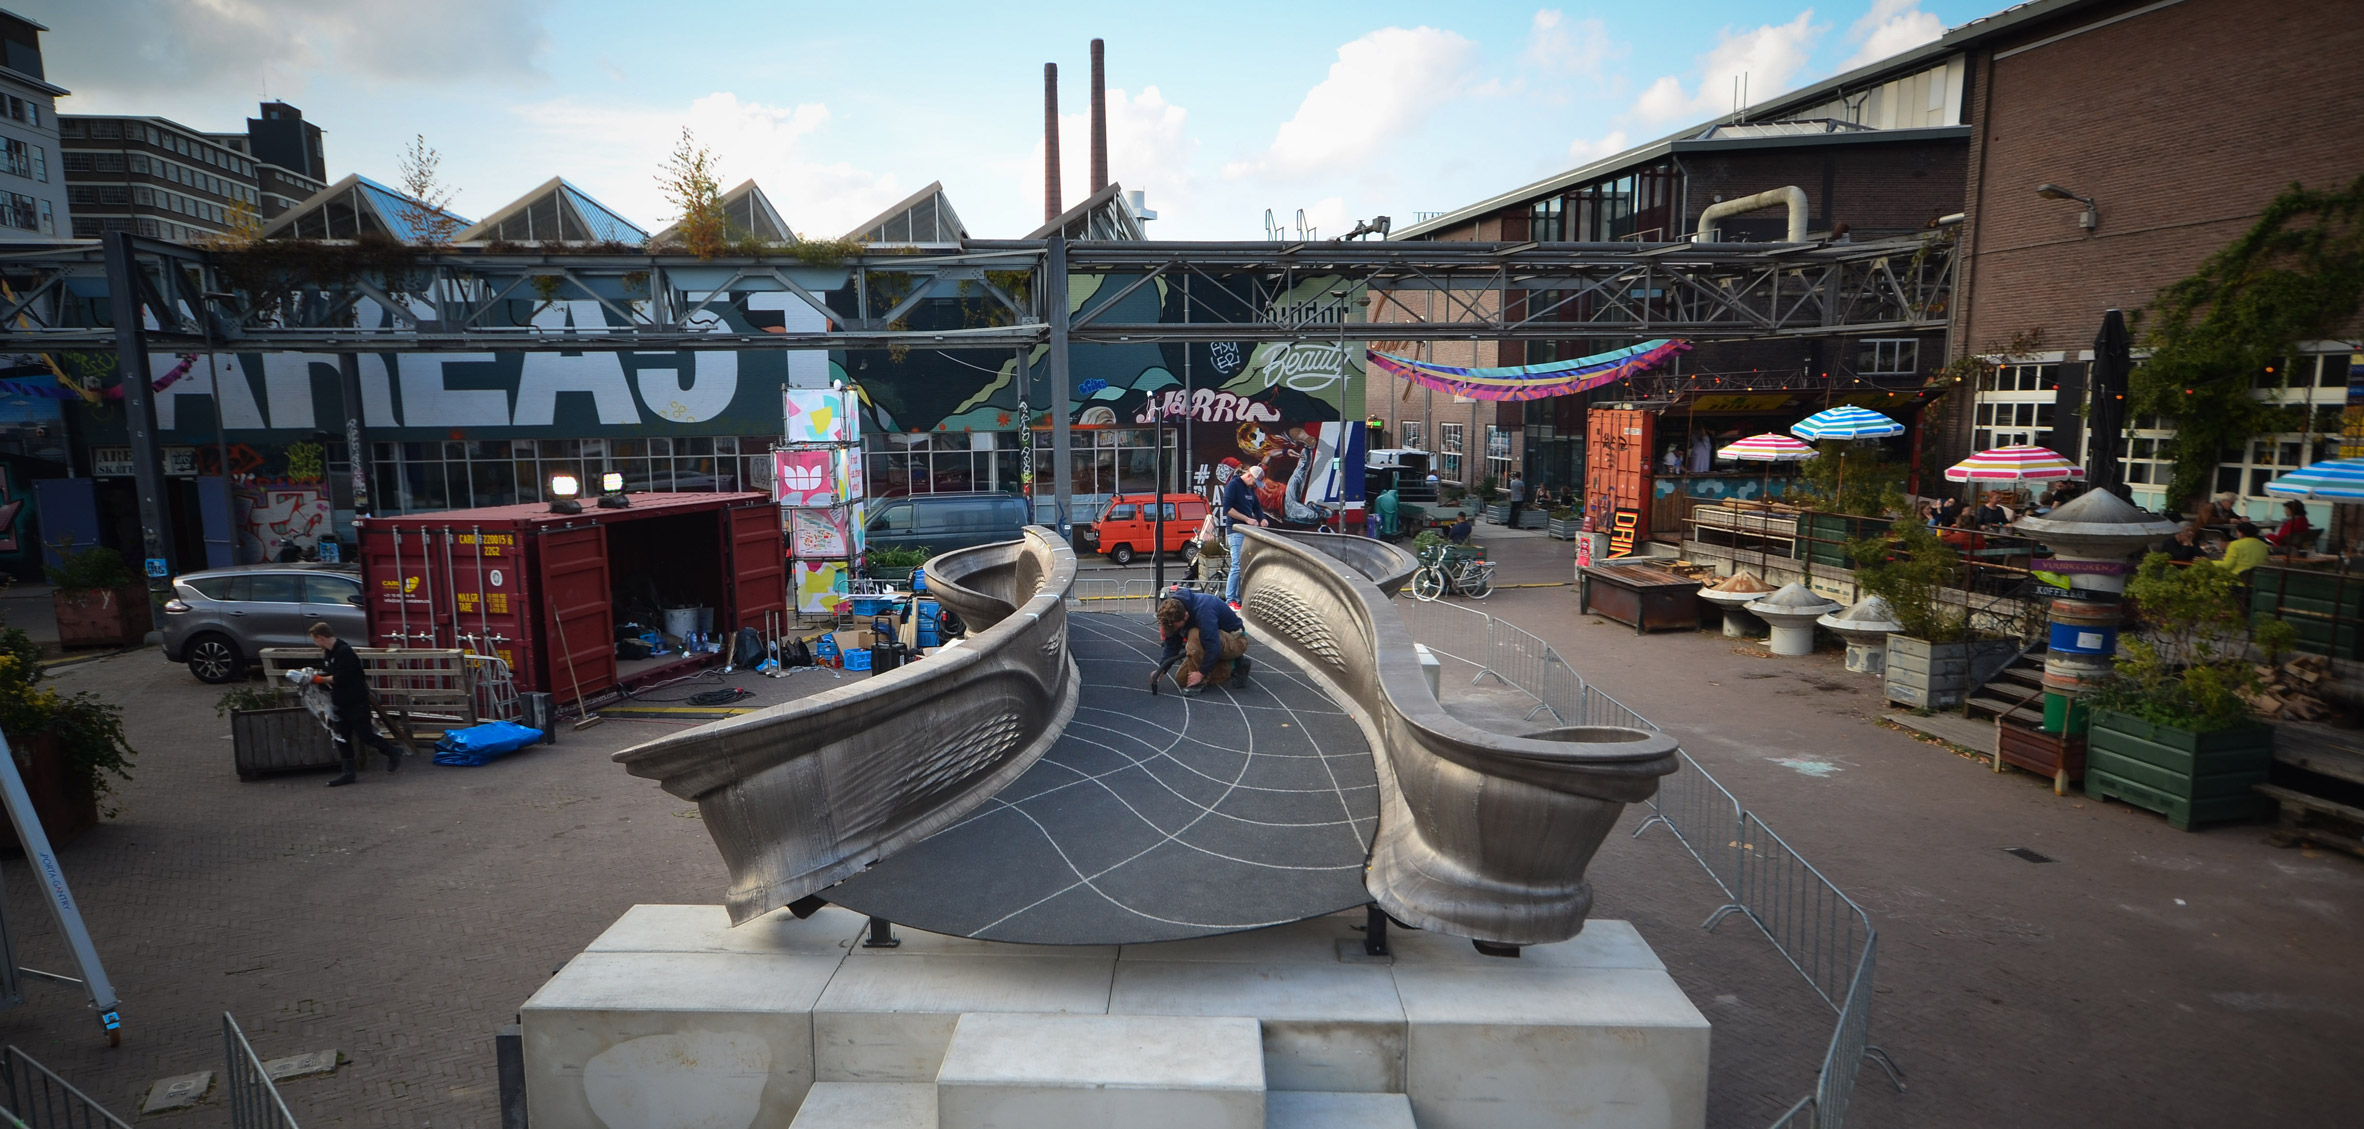 Dutch technology startup MX3D completes world's first 3D printed stainless  steel bridge over an Amsterdam canal